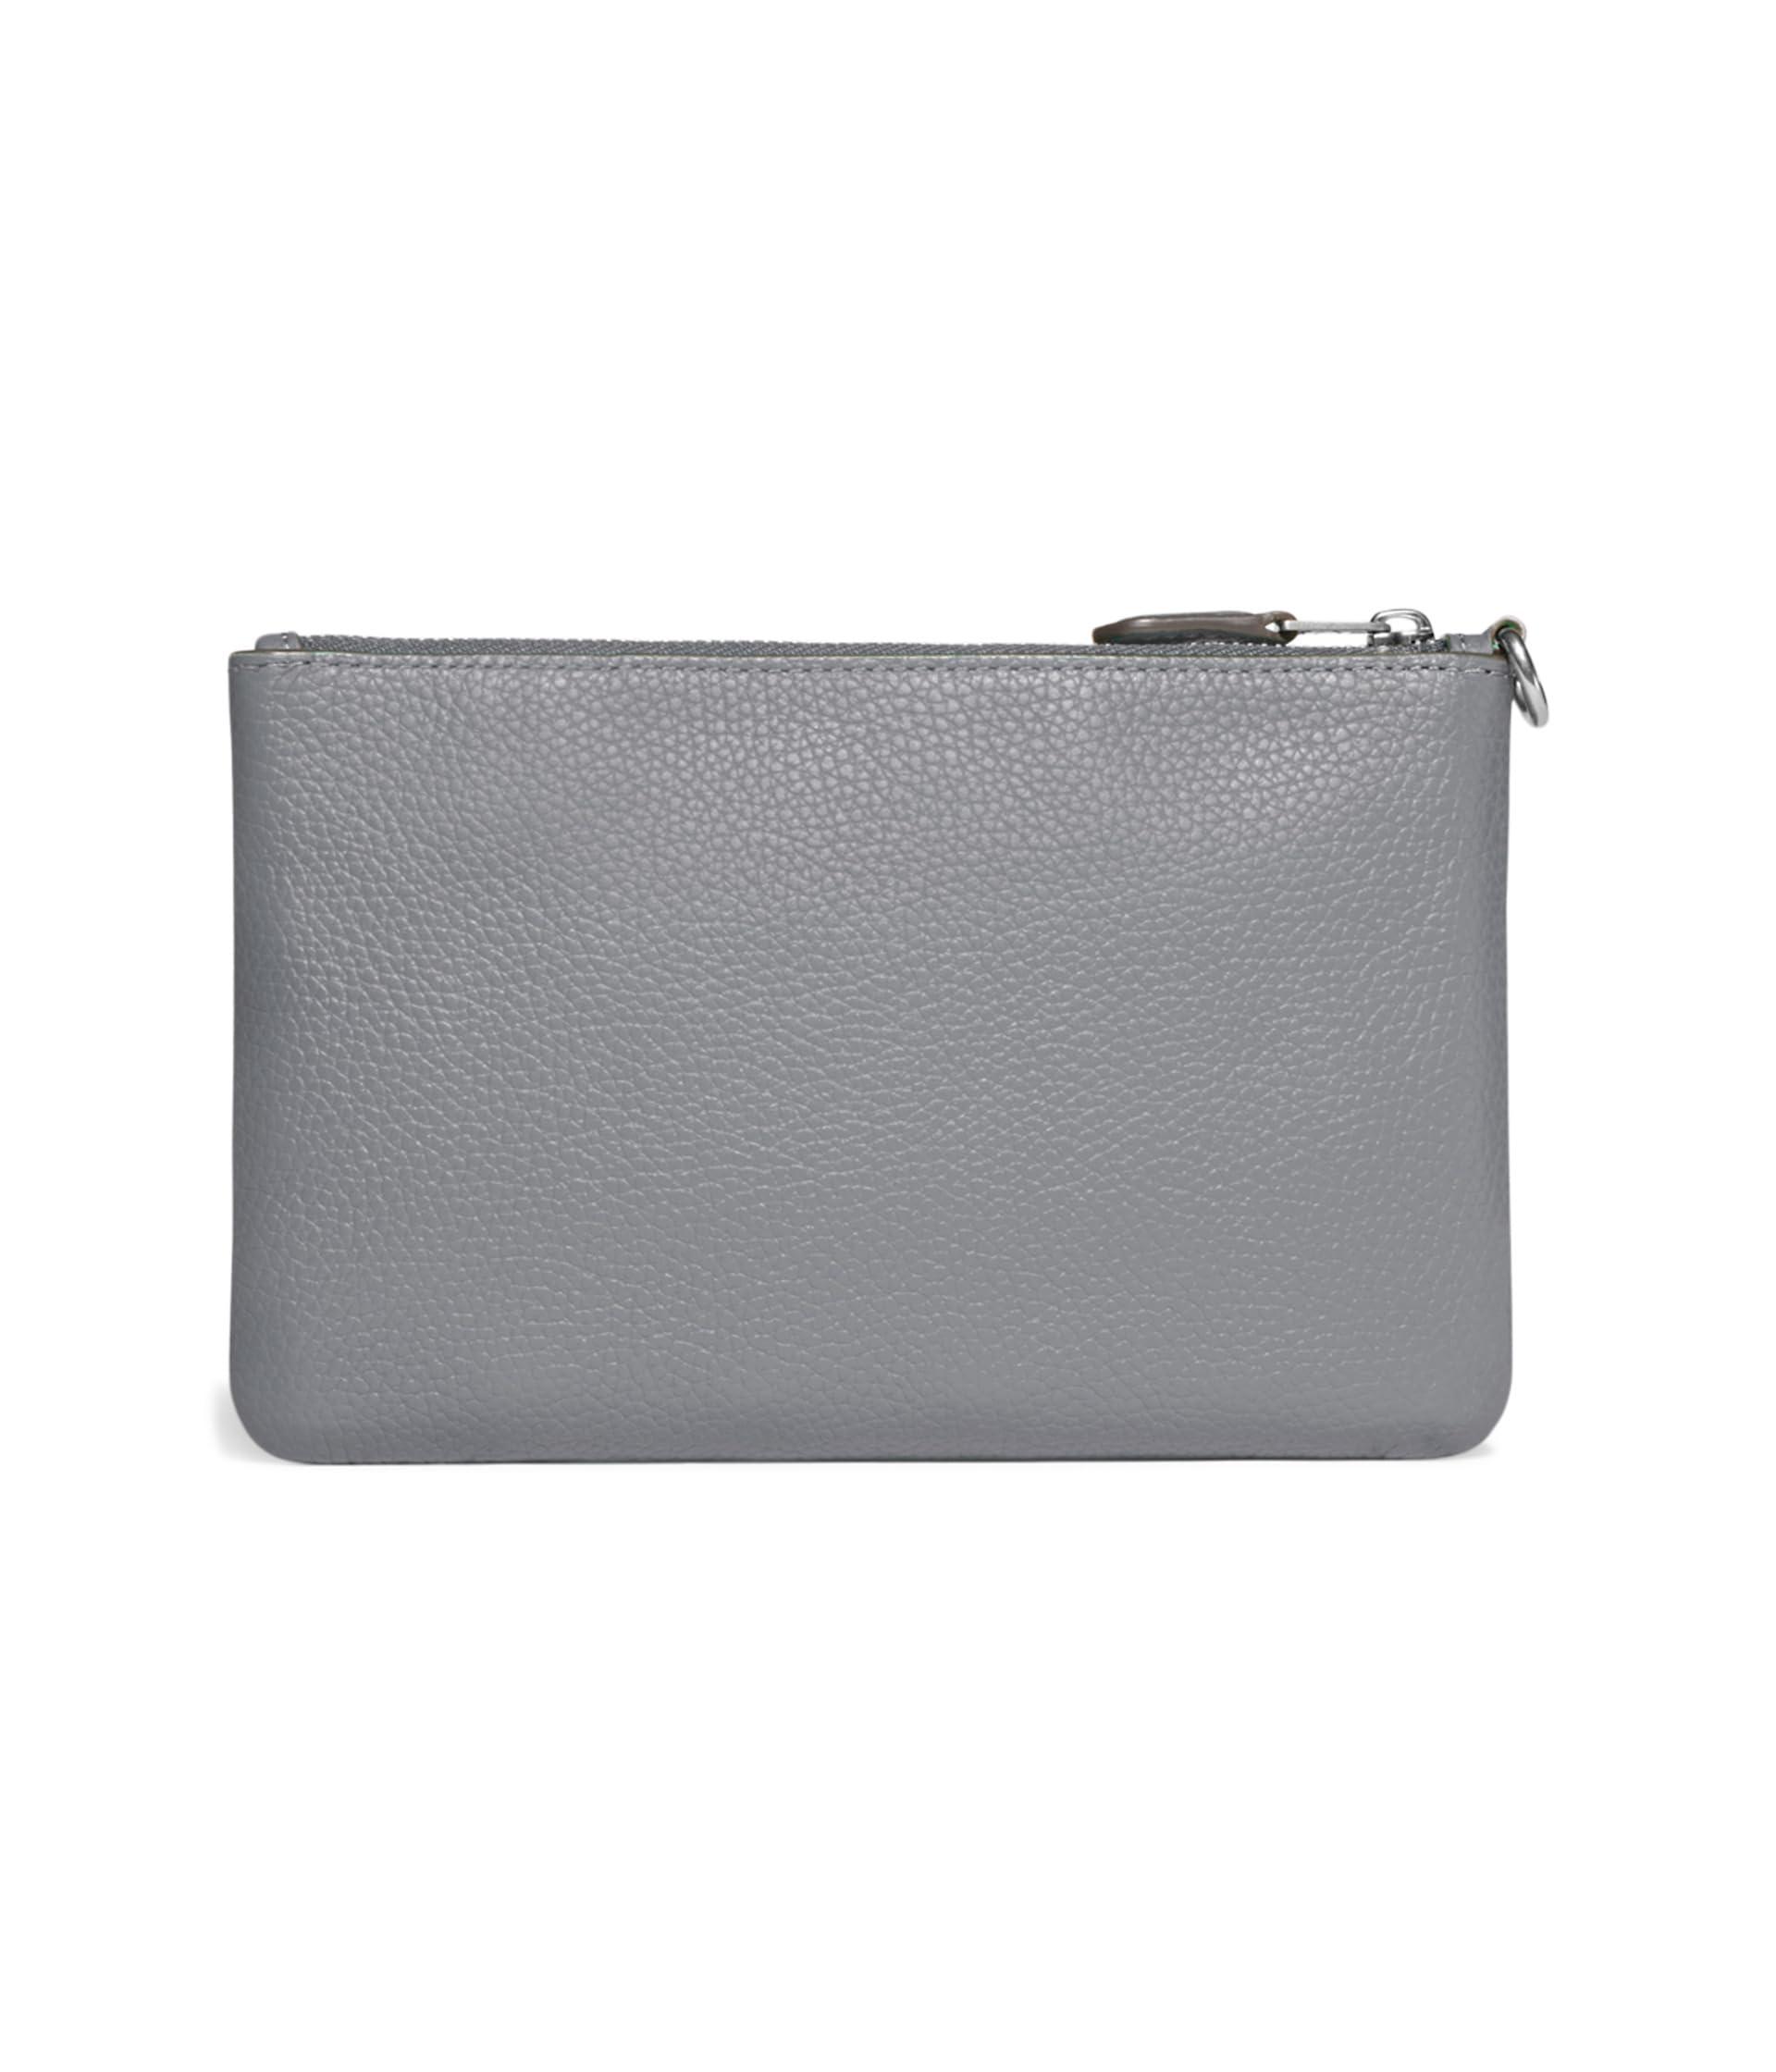 COACH Polished Pebble Leather Small Wristlet in Gray